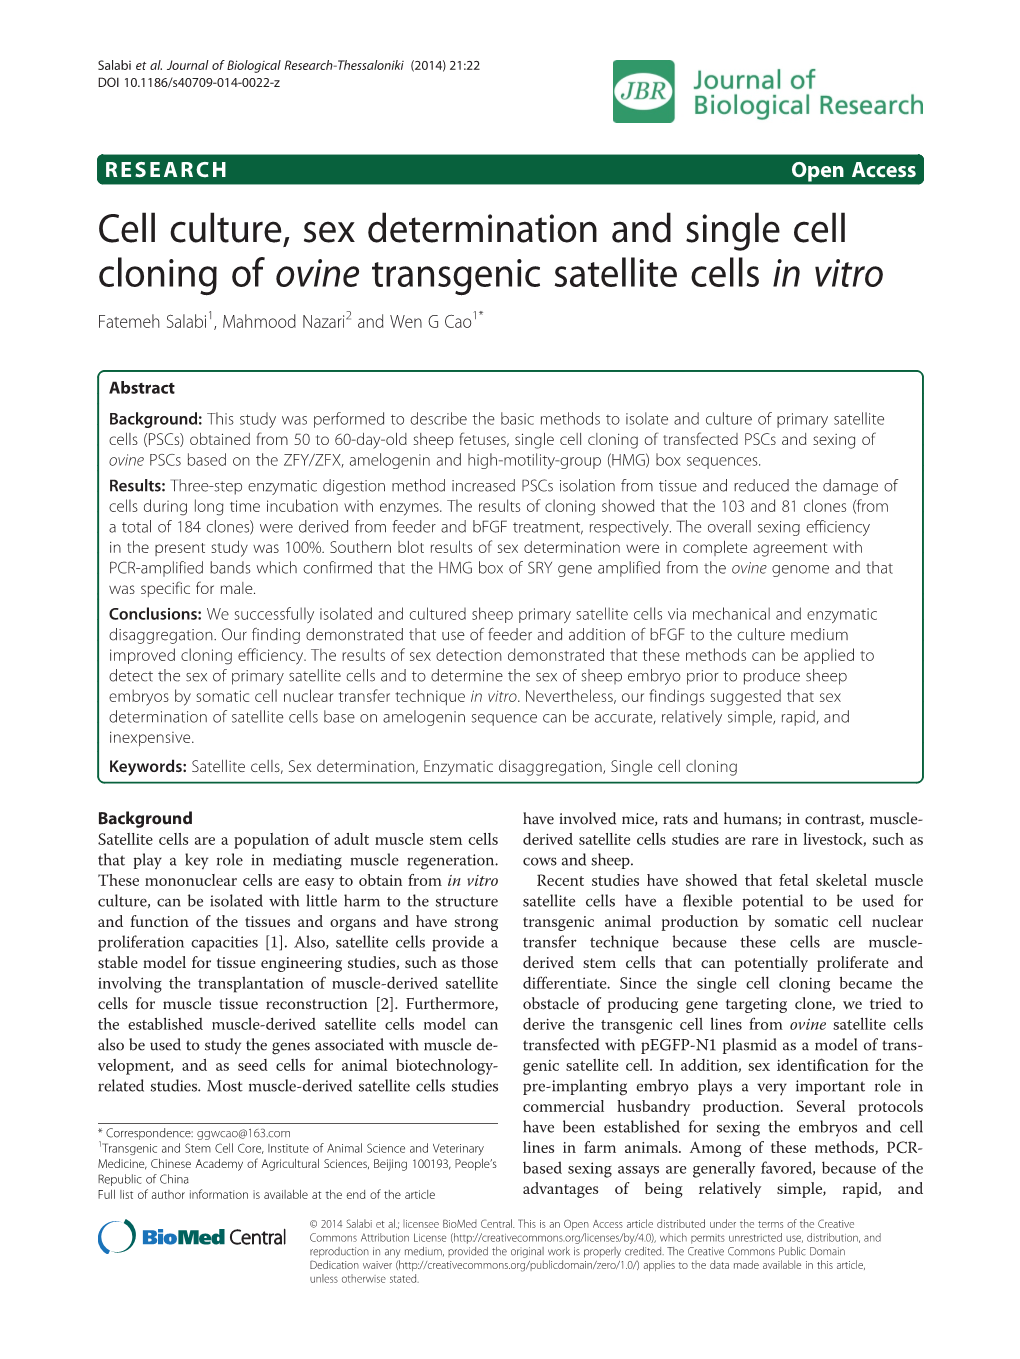 Cell Culture, Sex Determination and Single Cell Cloning of Ovine Transgenic Satellite Cells in Vitro Fatemeh Salabi1, Mahmood Nazari2 and Wen G Cao1*